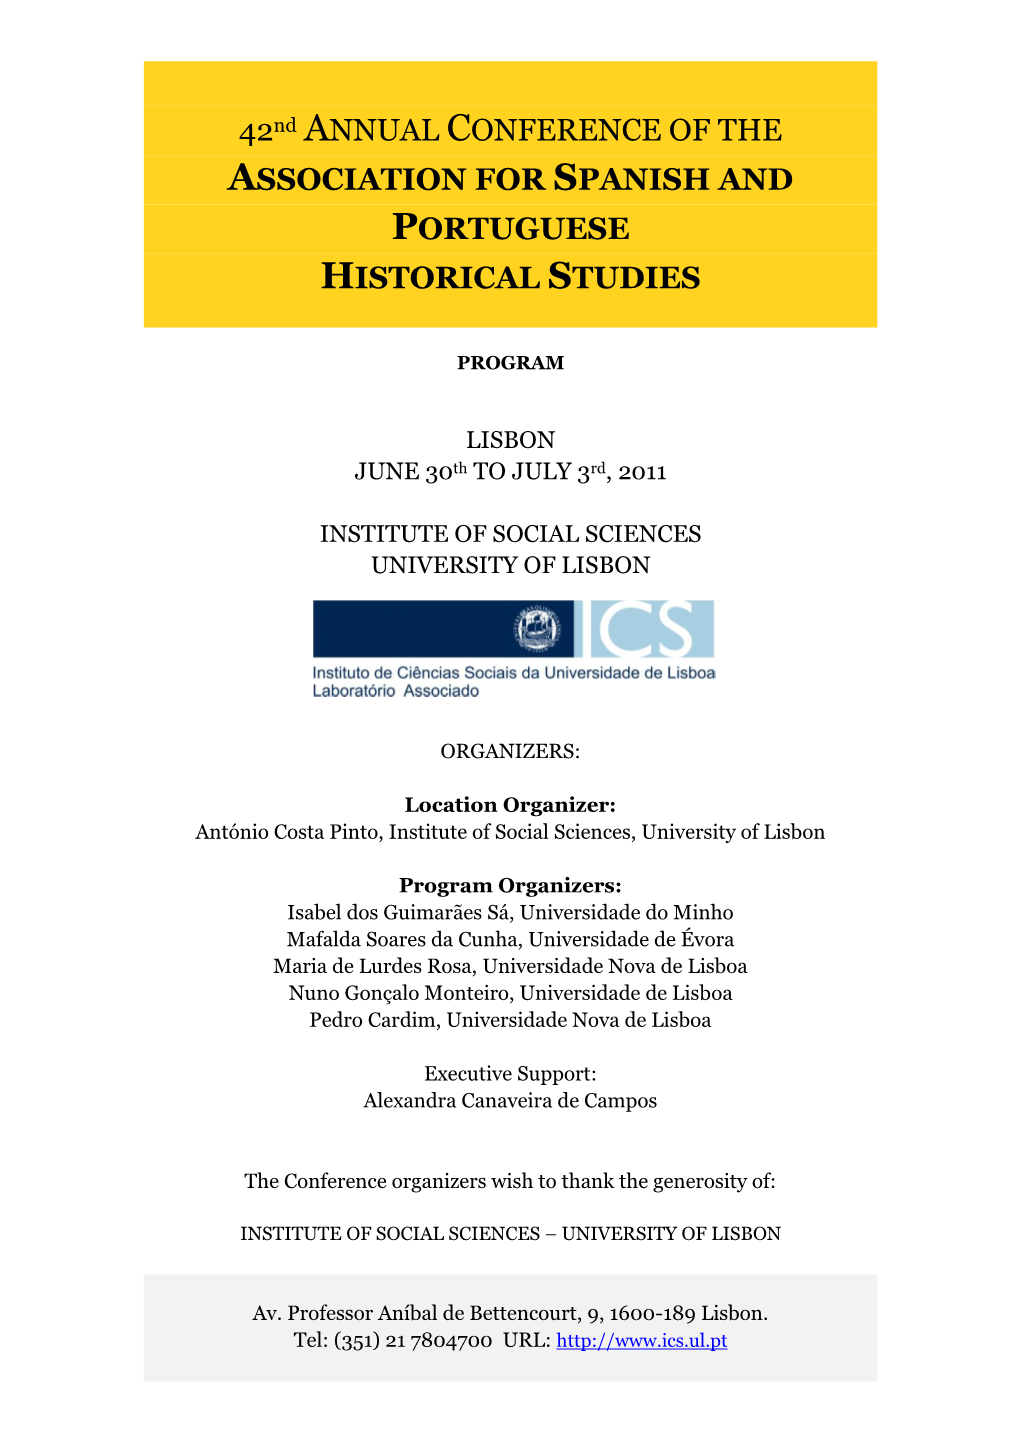 42Nd ANNUAL CONFERENCE of the ASSOCIATION for SPANISH and PORTUGUESE HISTORICAL STUDIES